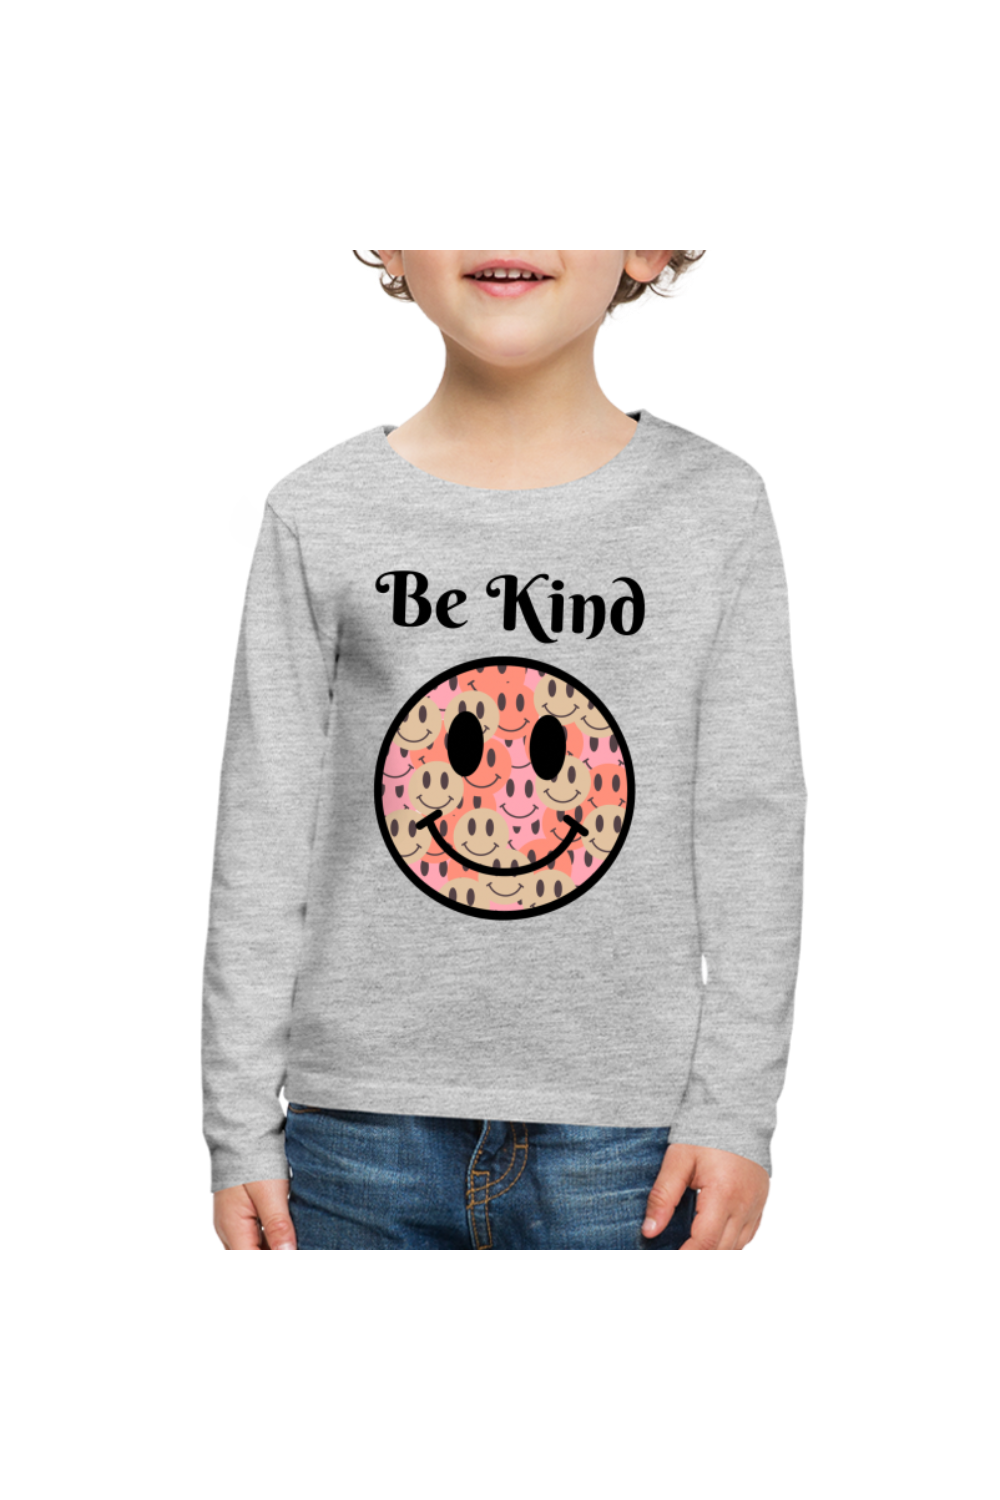 Girls Black Words Be Kind Smiley Face Long Sleeve T-Shirt - heather gray - NicholesGifts.online